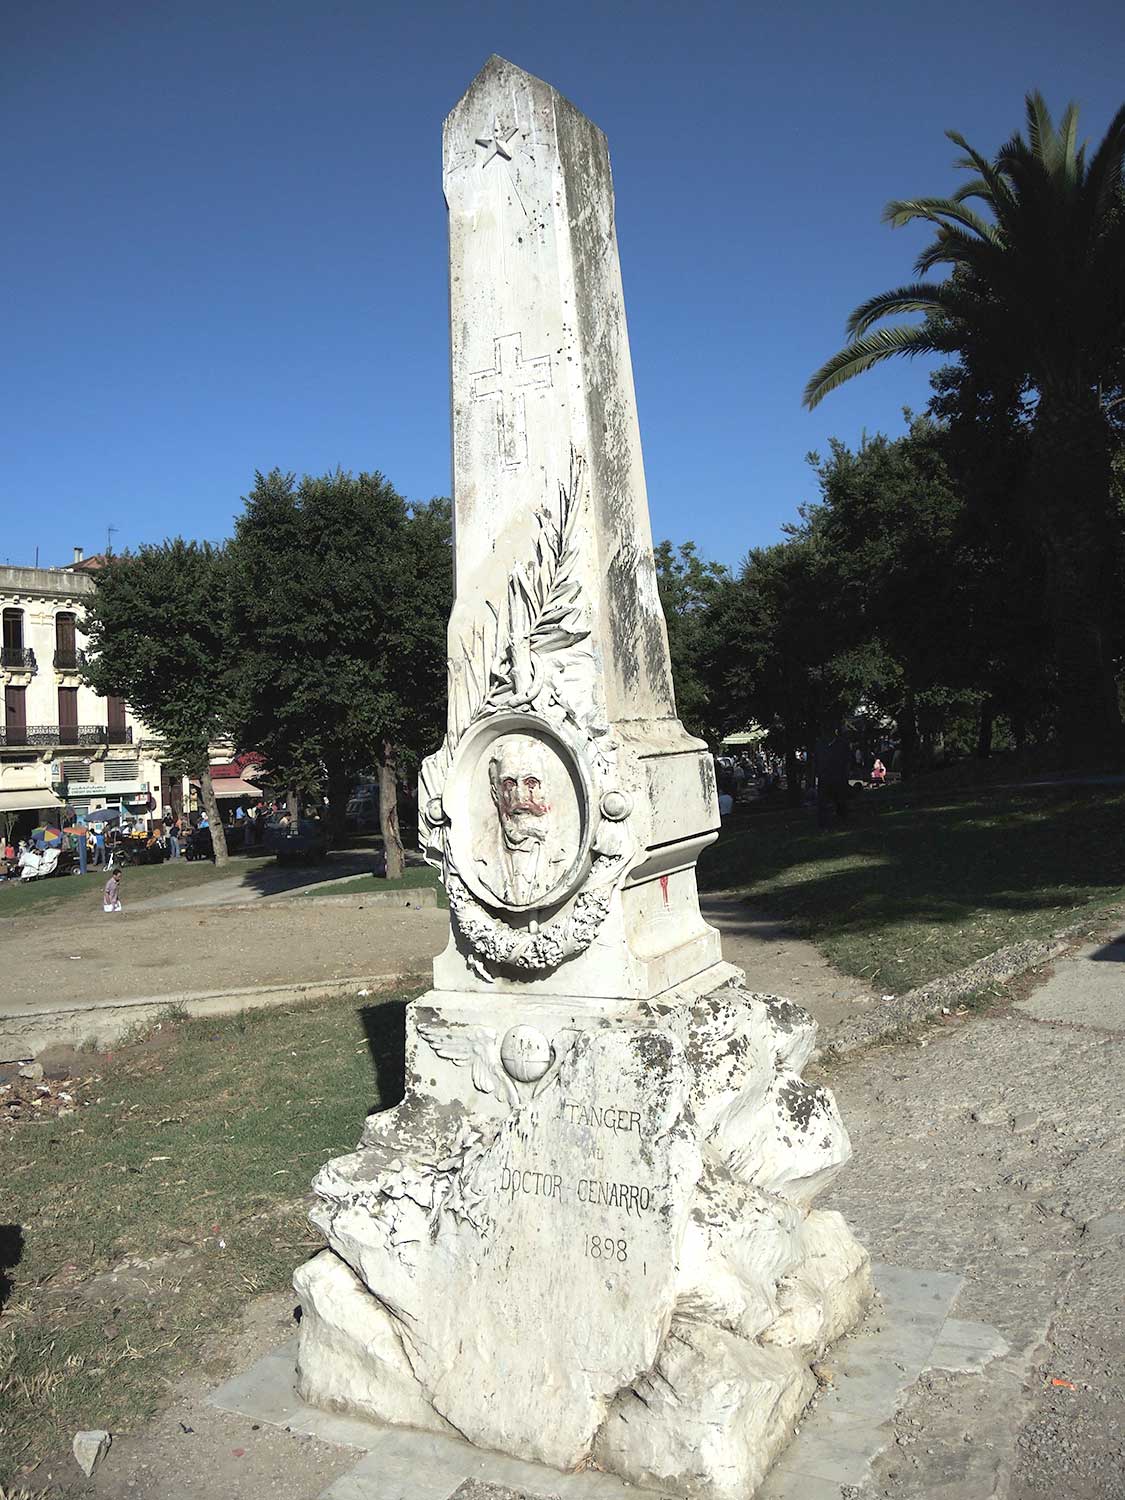 View of the monument on the tom of Doctor Severo Cenarro, erected in 1869